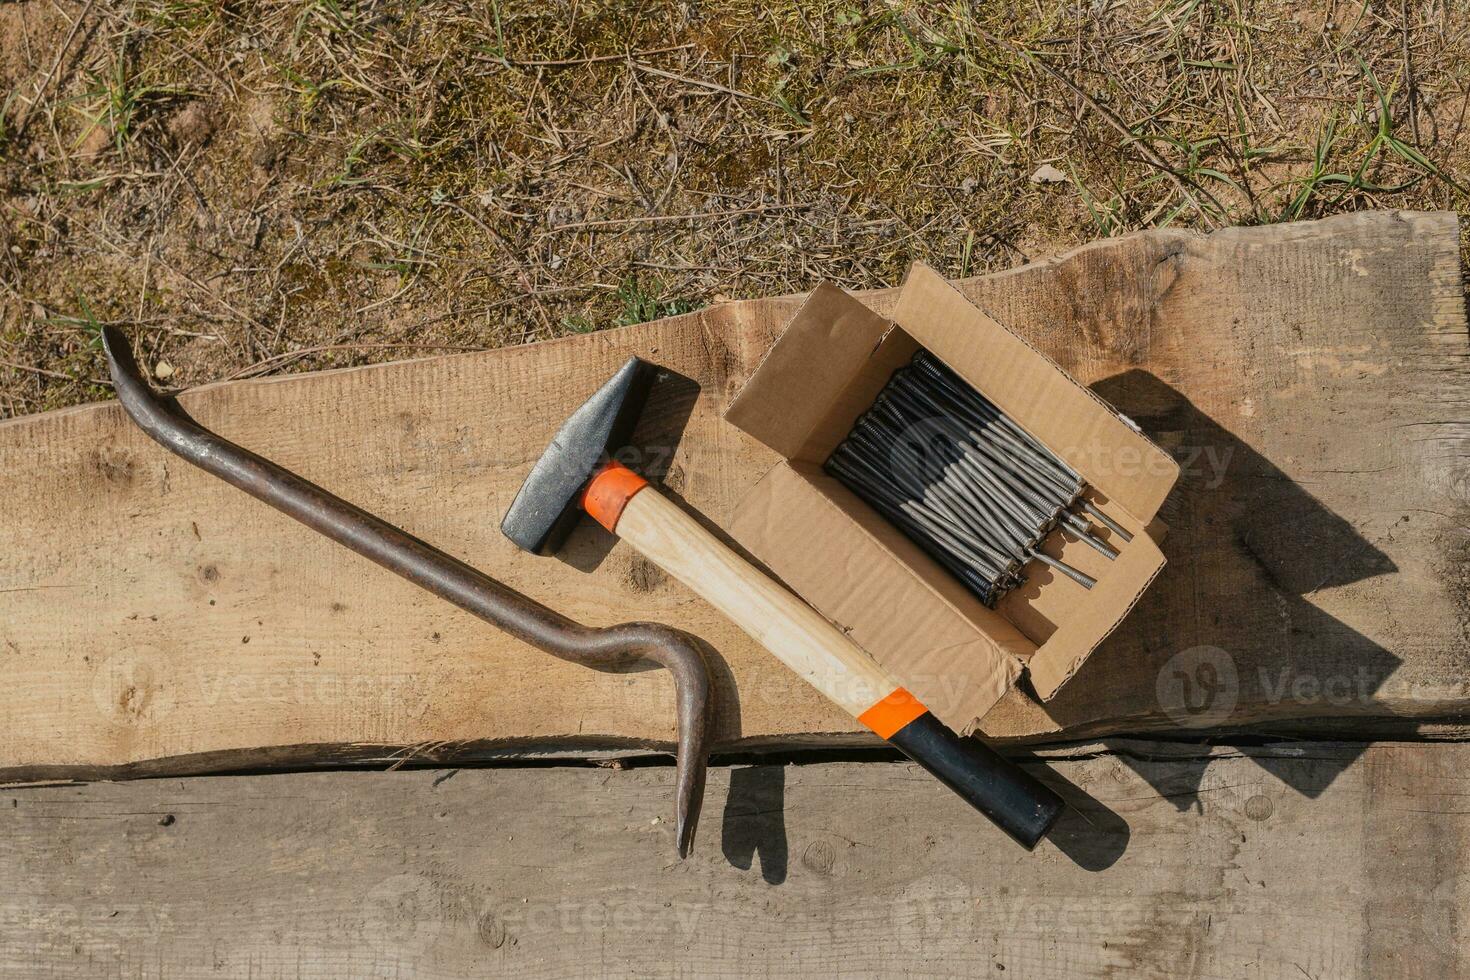 Workplace of a carpenter in the yard - hammer, nails and pry bar next to planks on the ground - nail puller photo